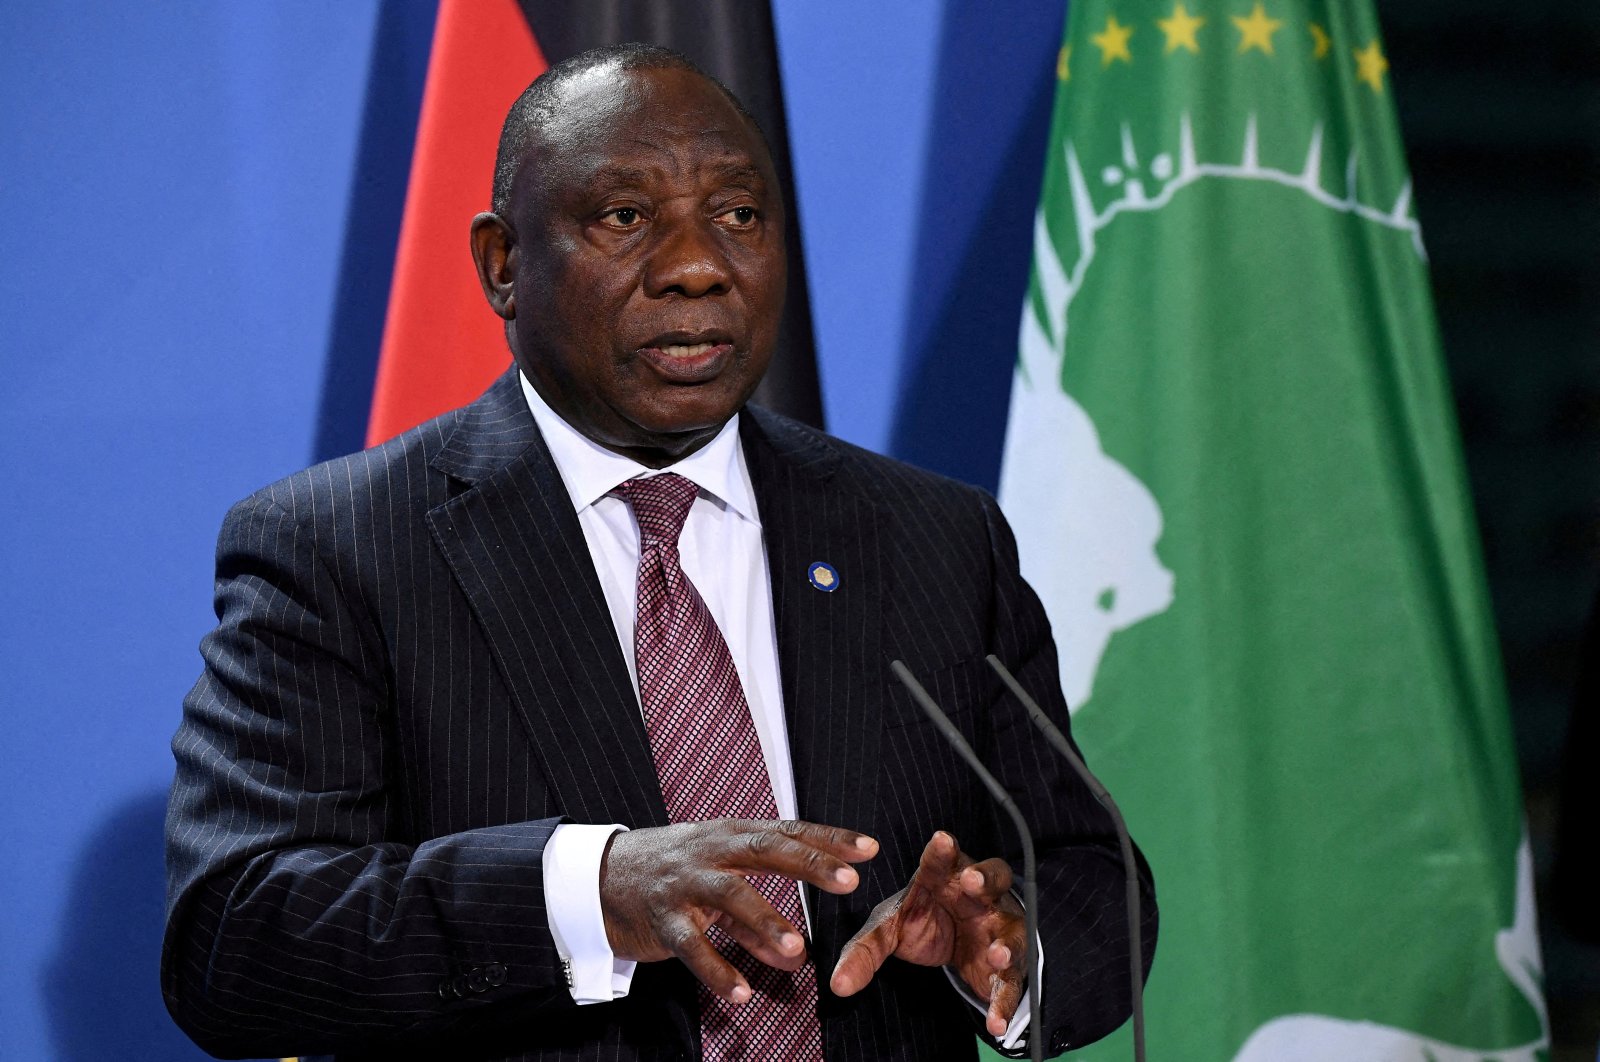 South African President Cyril Ramaphosa addresses a news conference after the G20 Compact with Africa conference at the Chancellery in Berlin, Germany, Aug. 27, 2021. (Reuters Photo)